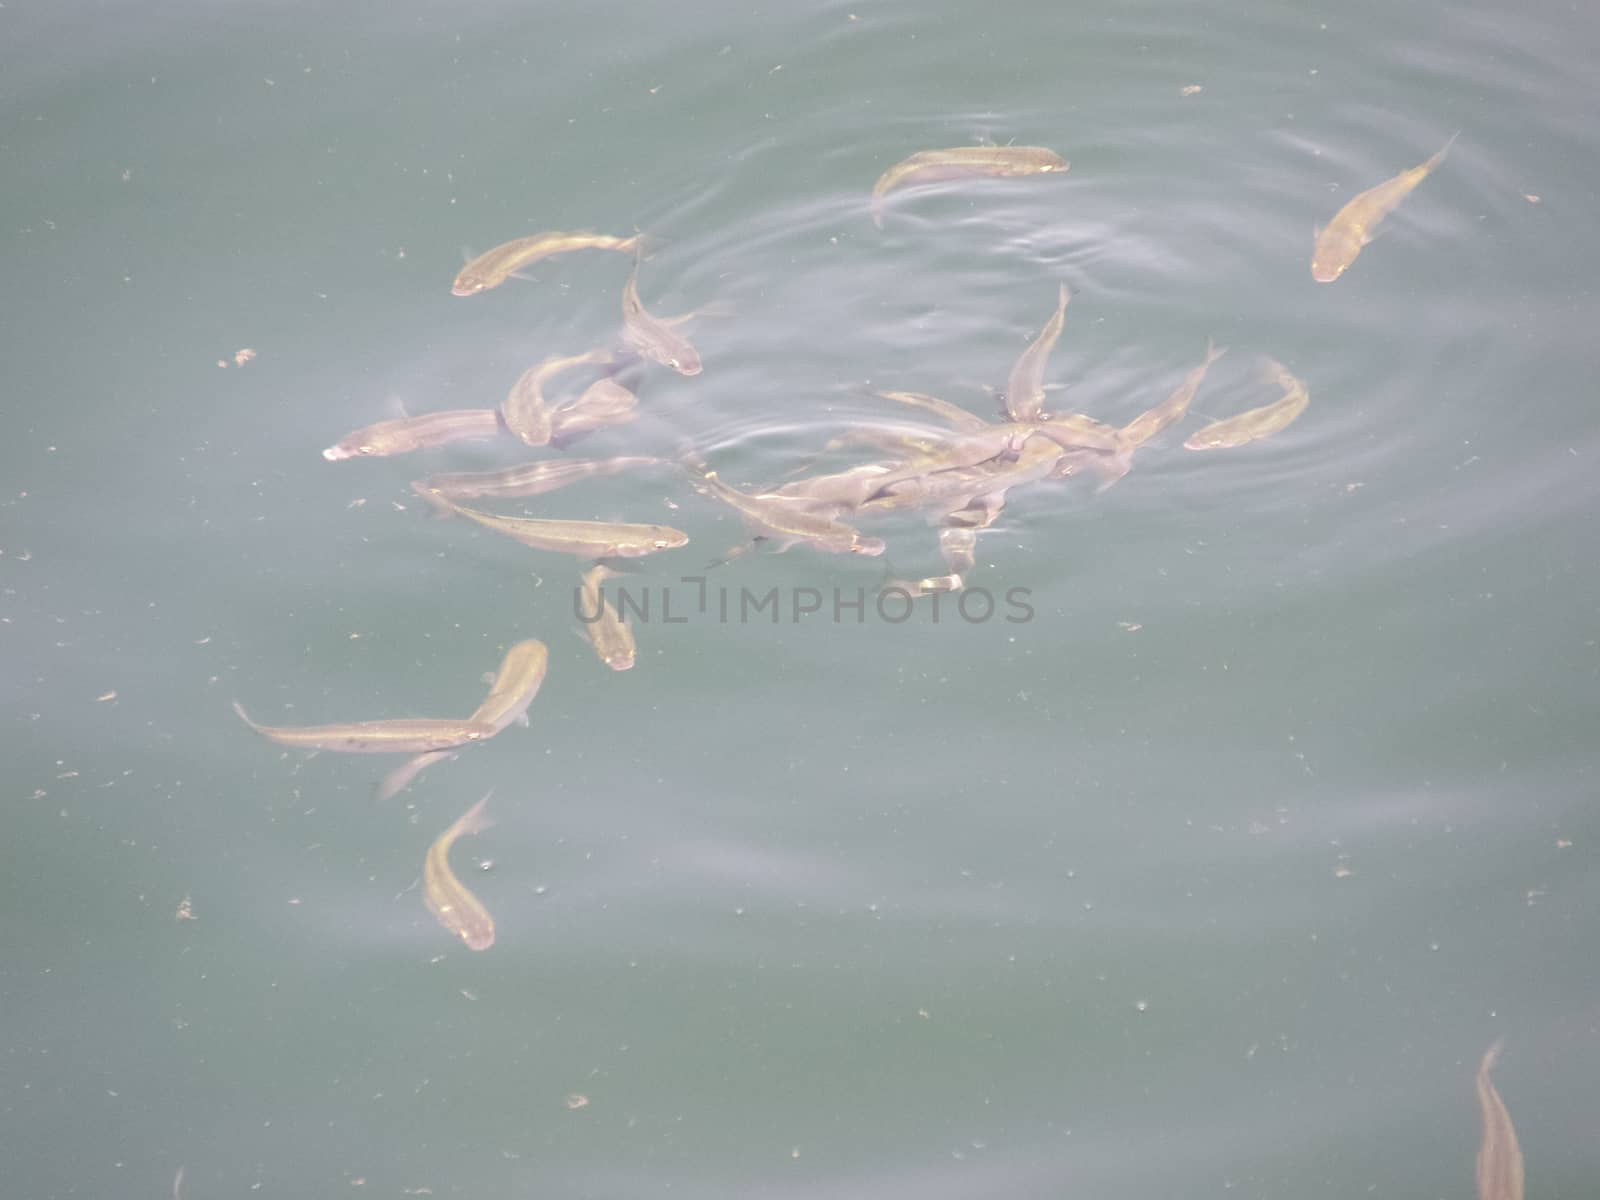 fish are eating bread thrown into the water. by DePo